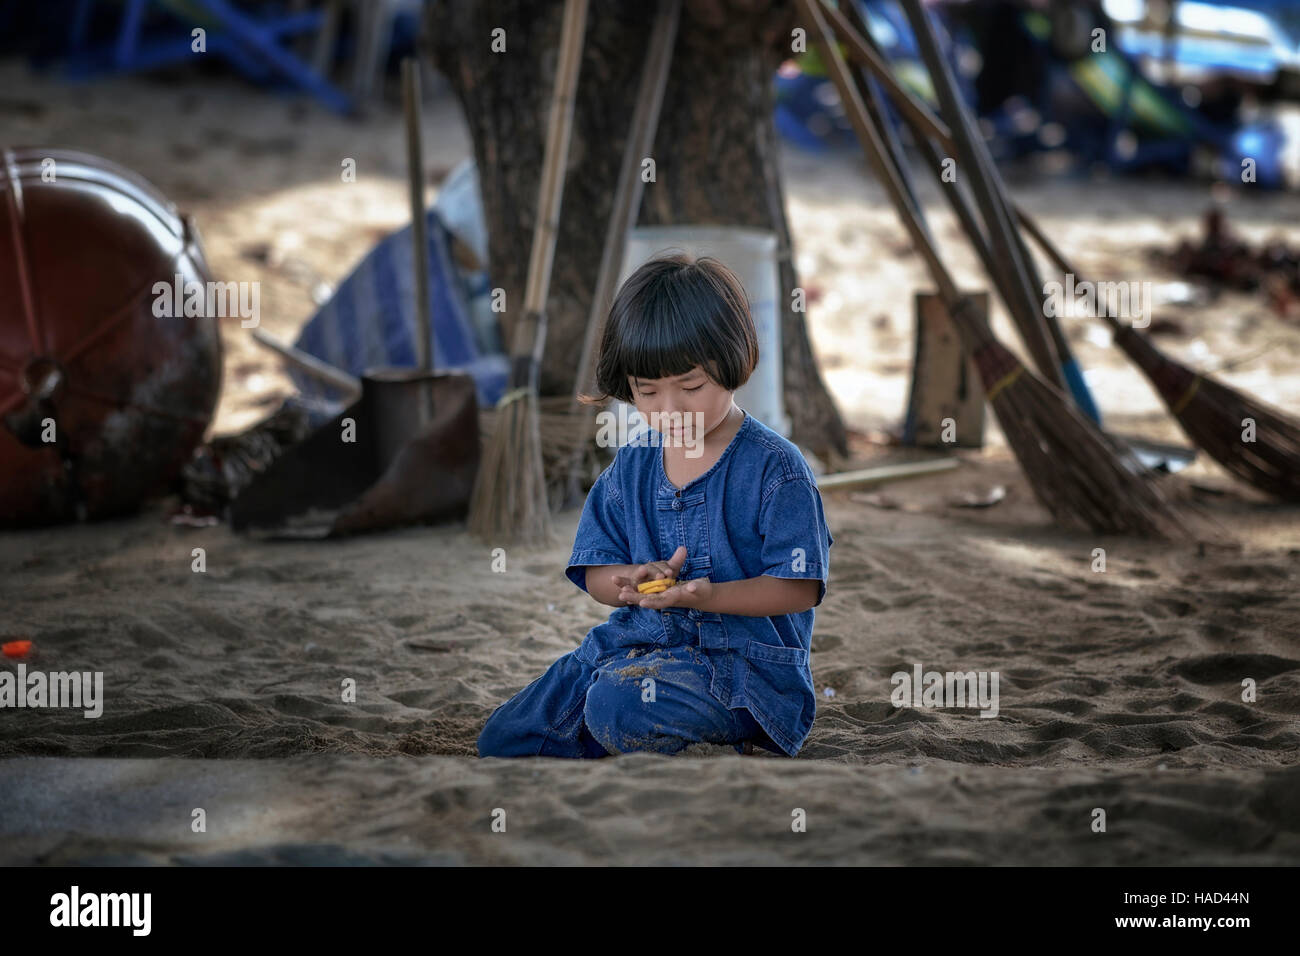 Child playing alone outside. Cute young Thai girl happy and content to play alone in the sand. Pattaya Thailand S. E. Asia Stock Photo